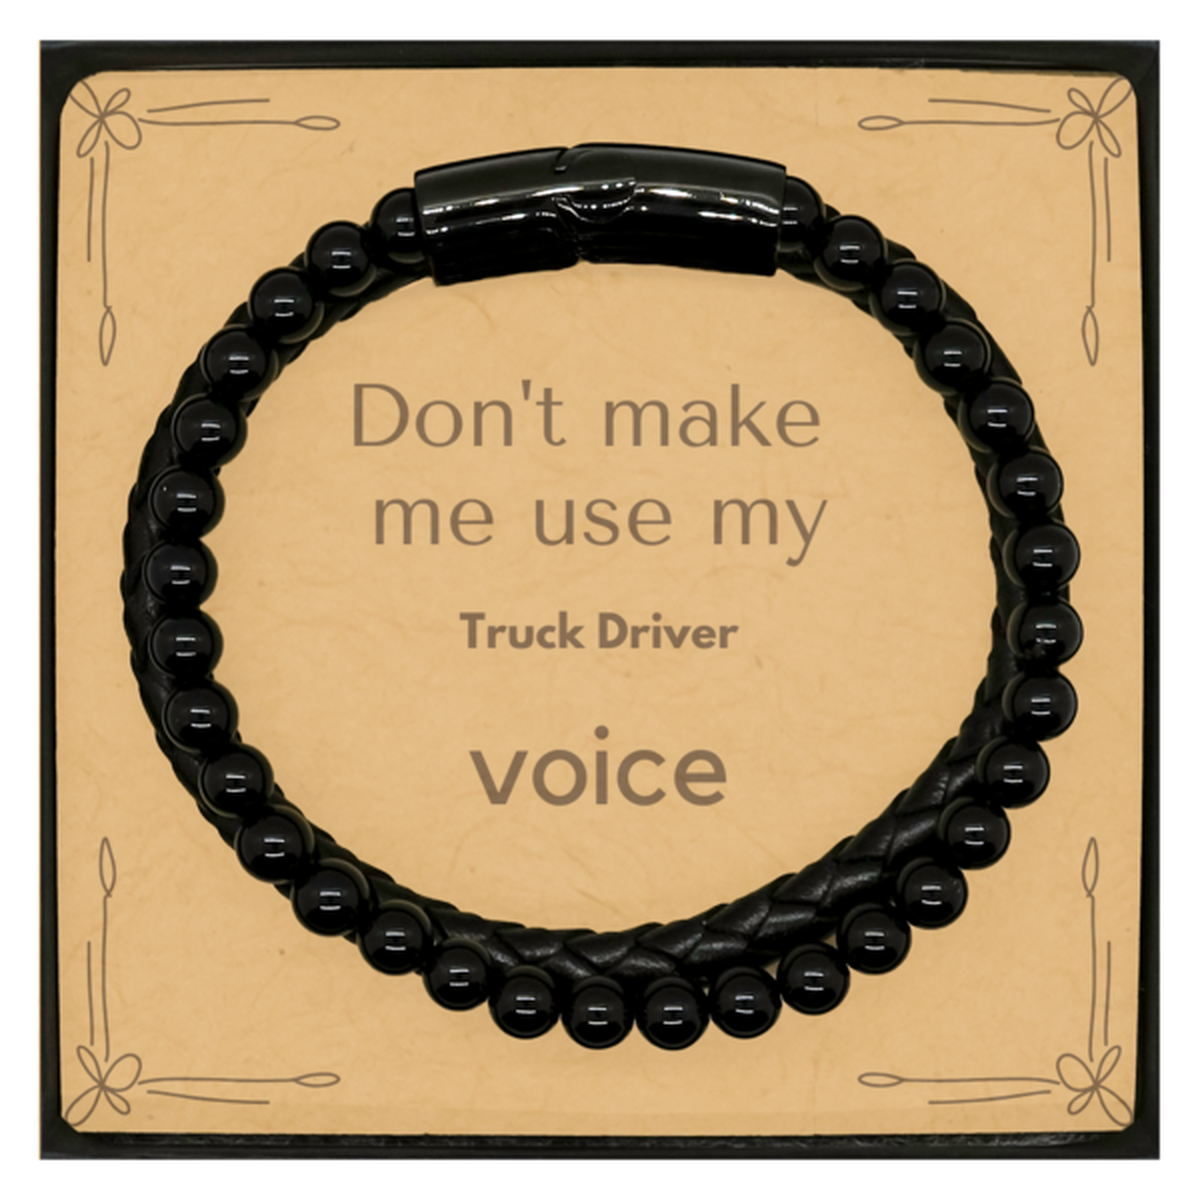 Don't make me use my Truck Driver voice, Sarcasm Truck Driver Card Gifts, Christmas Truck Driver Stone Leather Bracelets Birthday Unique Gifts For Truck Driver Coworkers, Men, Women, Colleague, Friends